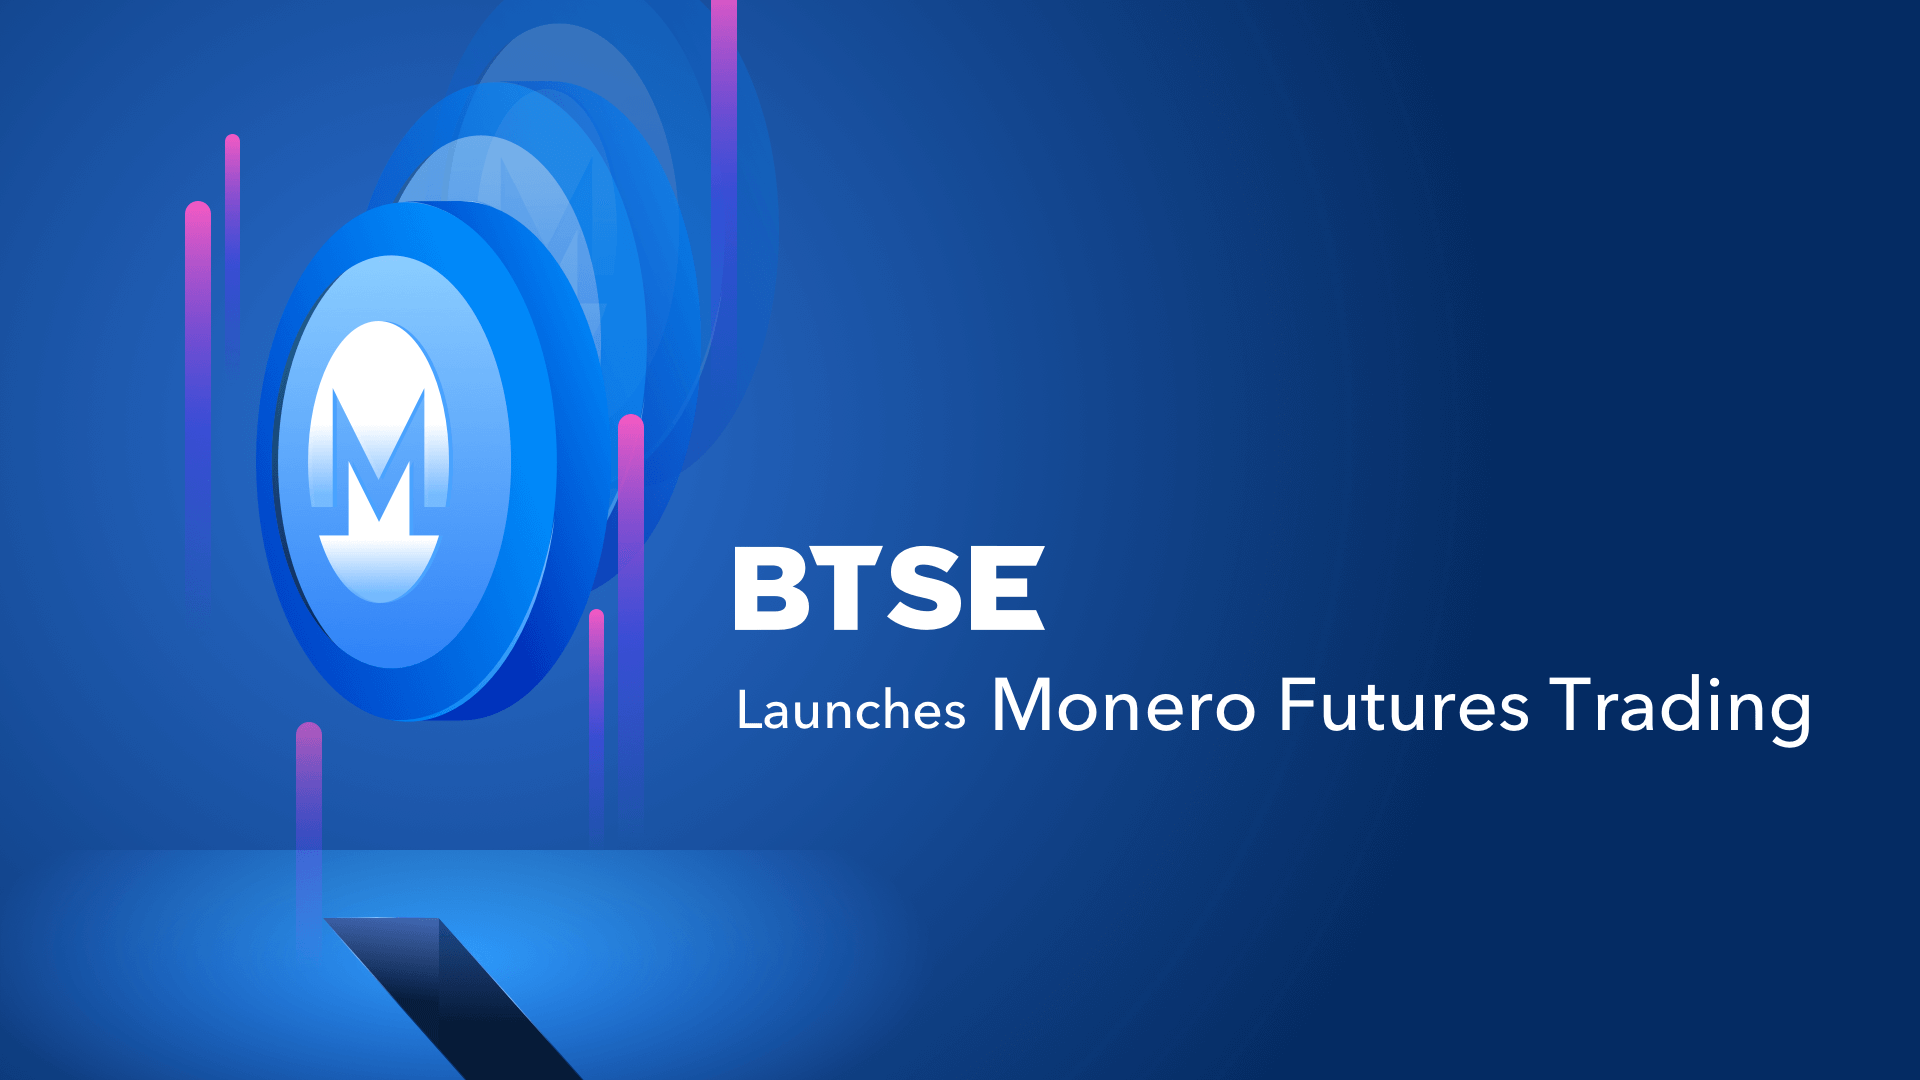 BTSE One of the First Exchanges to Launch Monero Futures Trading